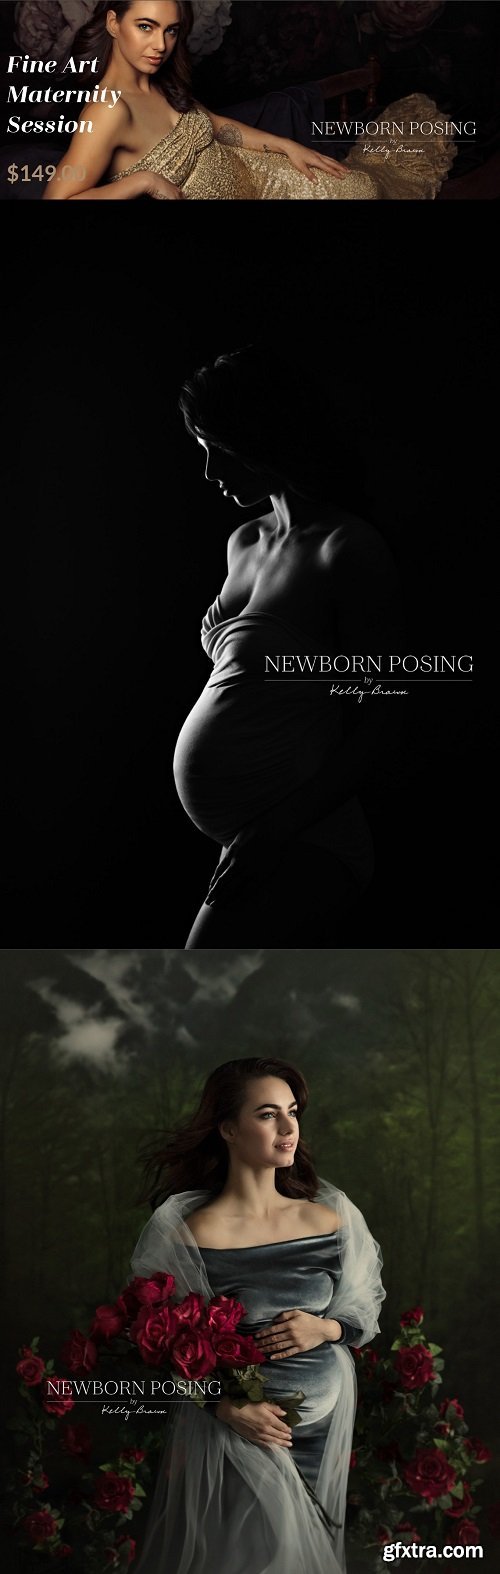 Fine Art Maternity Session by Kelly Brown